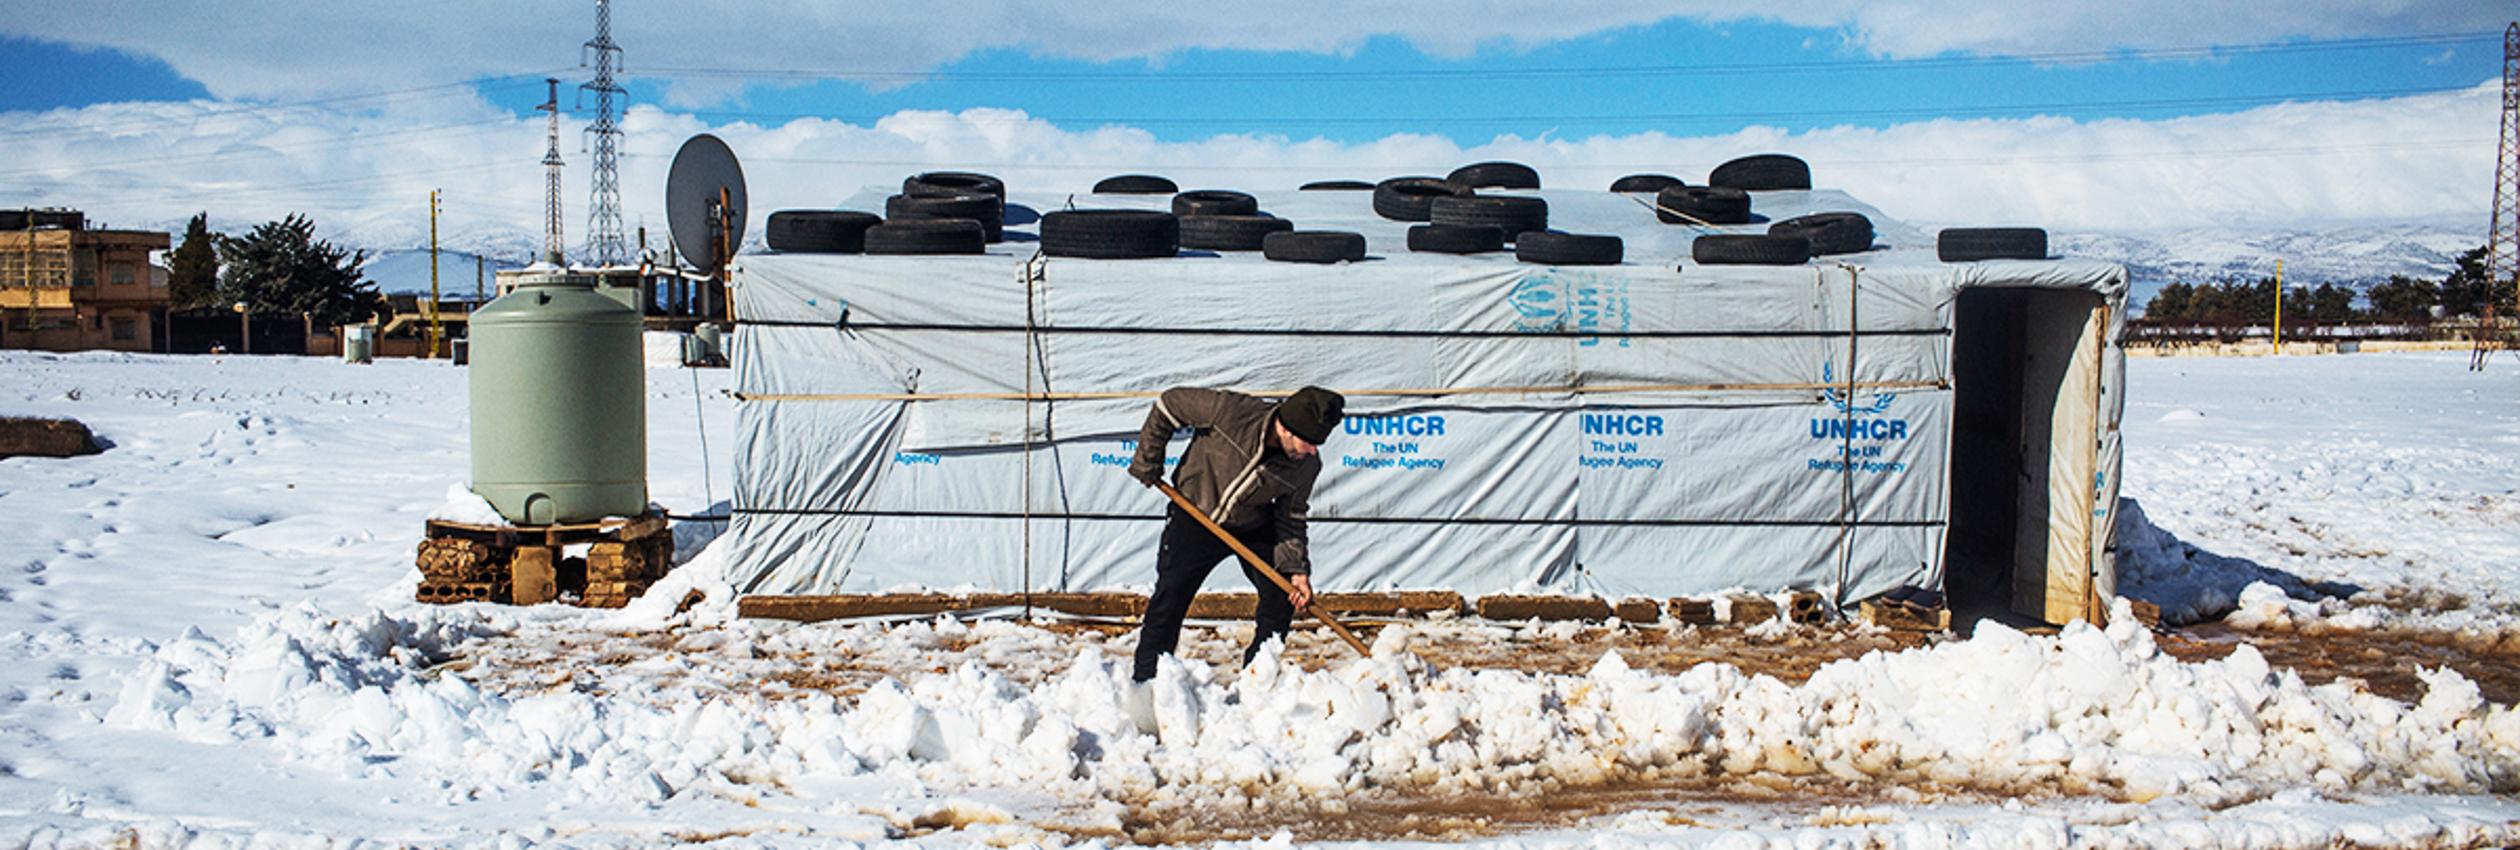 Ahmed, a Syrian refugee from Raqqa, removes snow with a shovel outside his home in the informal settlement camp of Doures, Lebanon. @UNHCR/ Shabia Mantoo